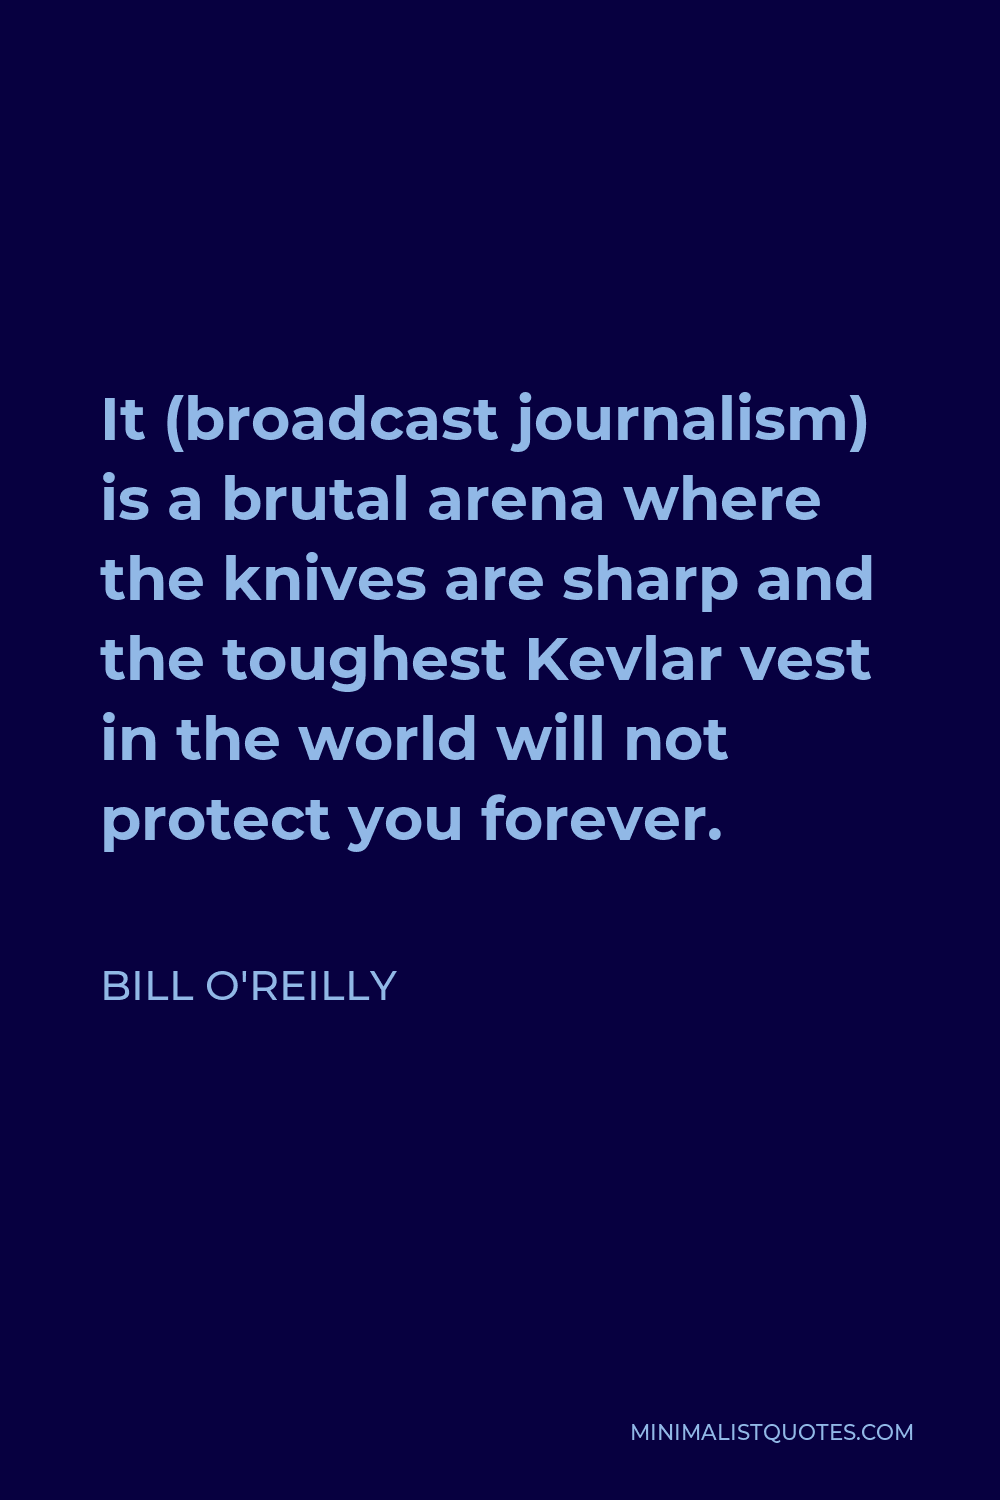 Bill O'Reilly Quote - It (broadcast journalism) is a brutal arena where the knives are sharp and the toughest Kevlar vest in the world will not protect you forever.